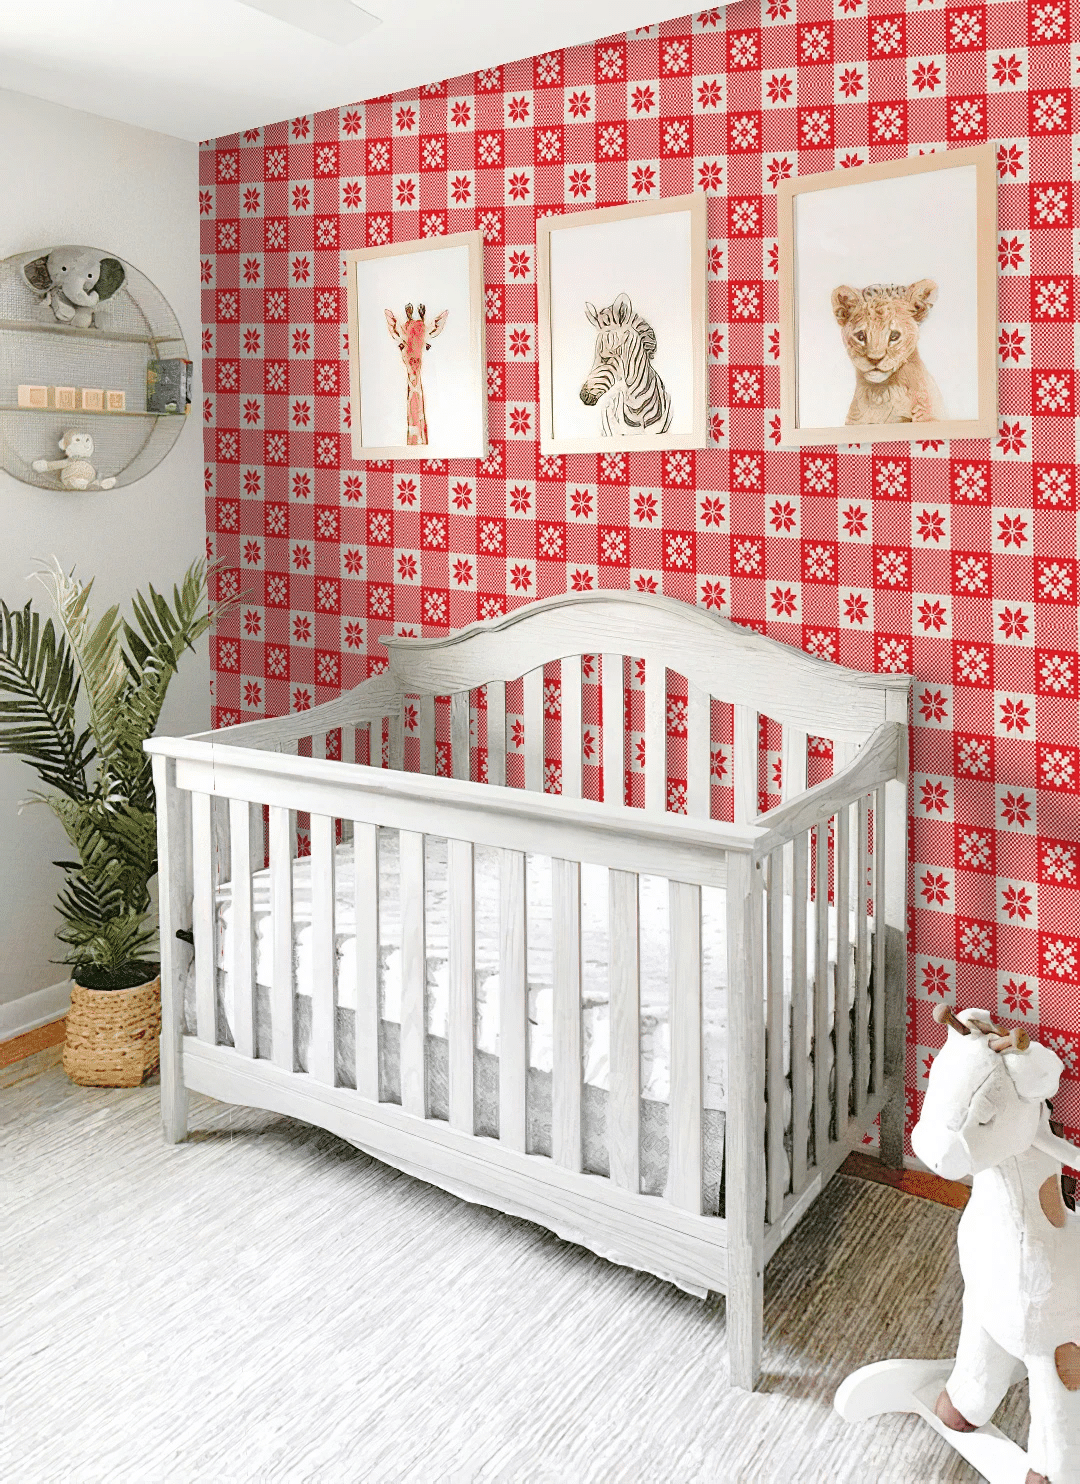 Christmas Checkered Plaid Snowflakes Background In Red And White Wallpaper Wall Mural Home Decor